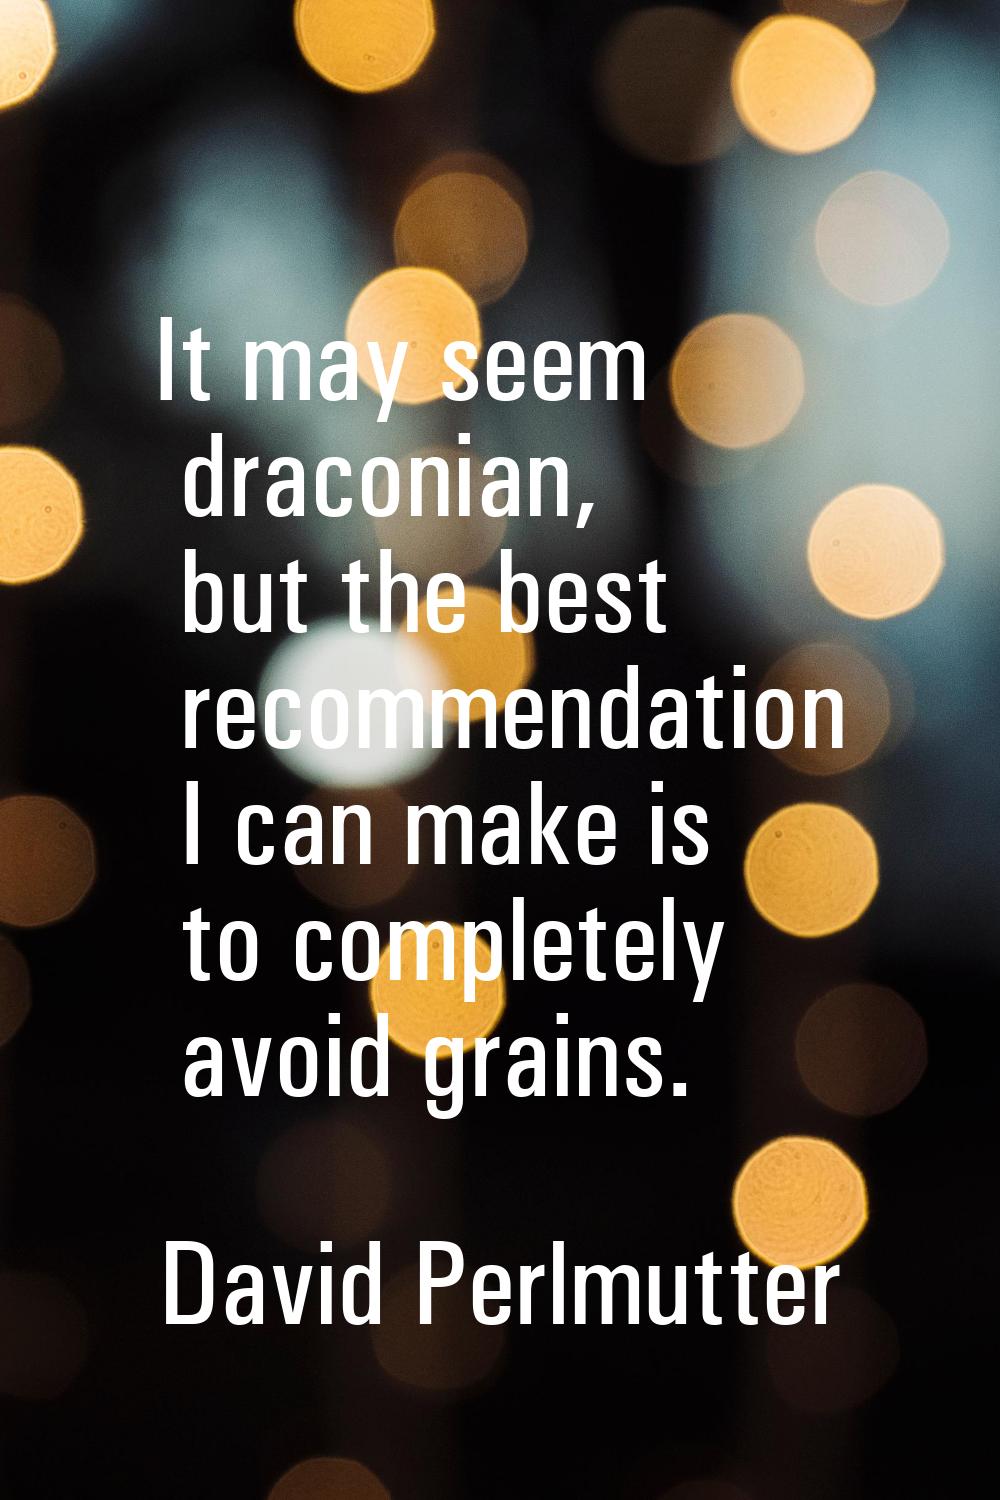 It may seem draconian, but the best recommendation I can make is to completely avoid grains.